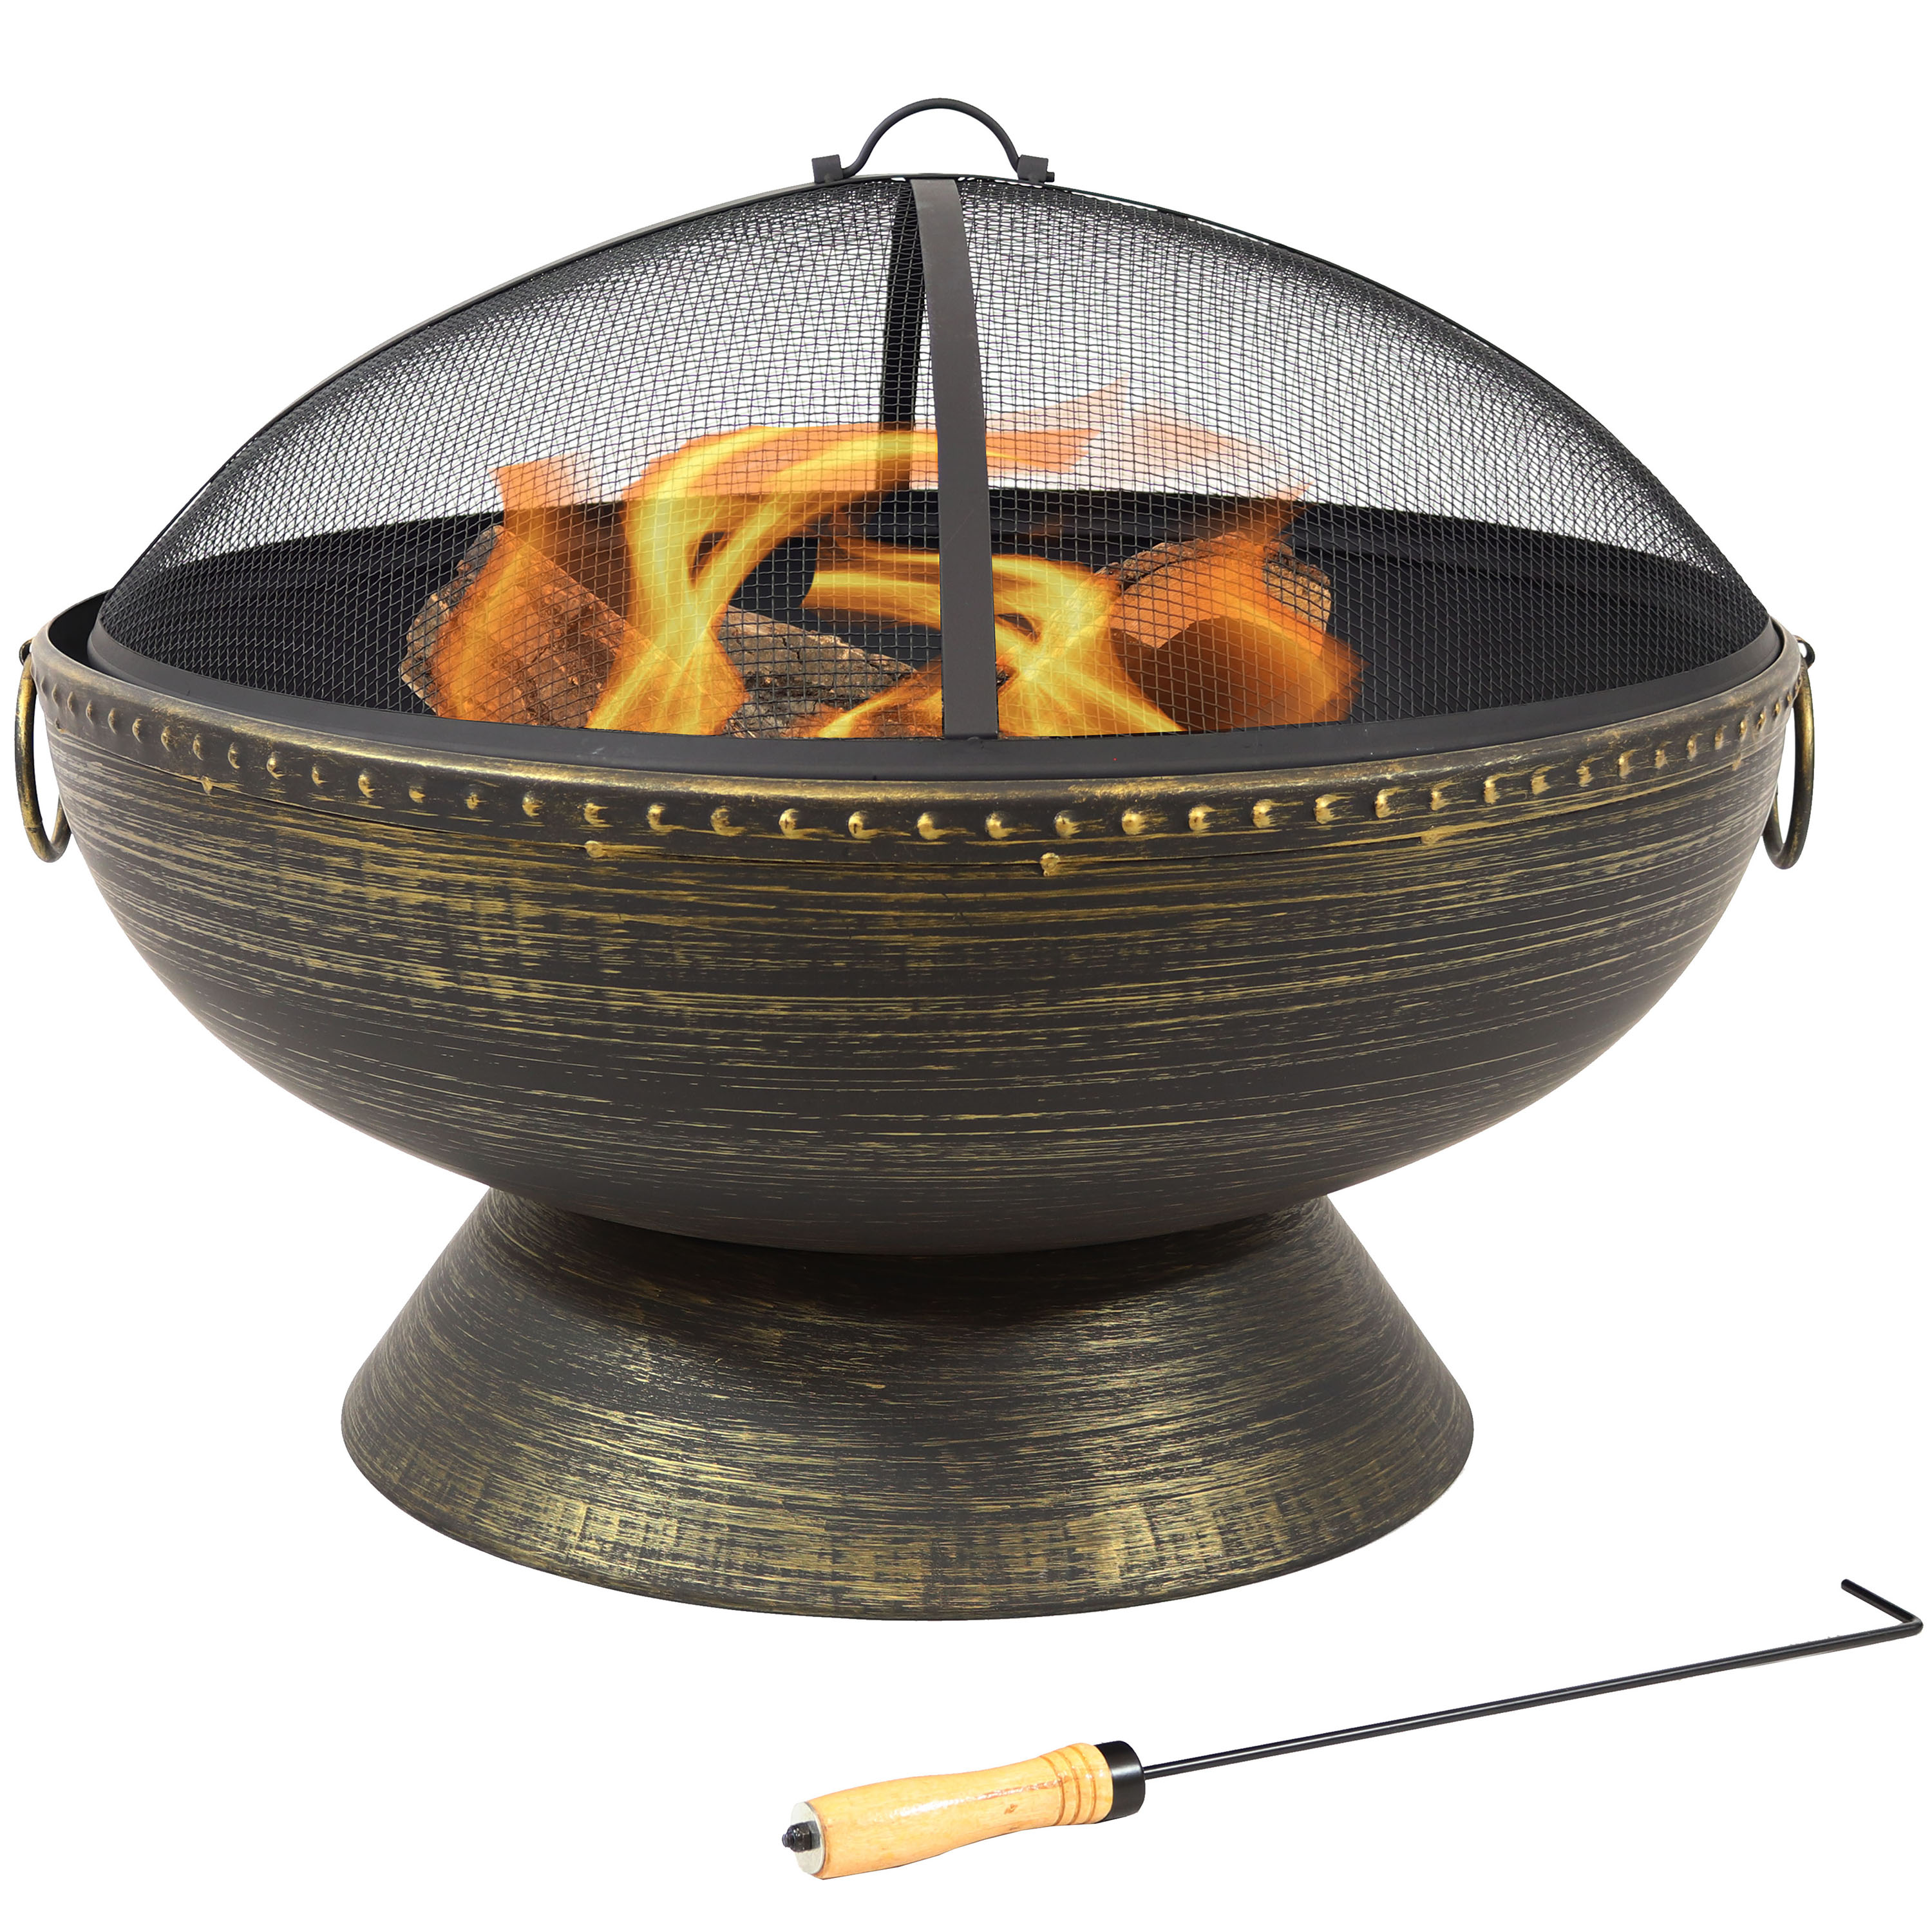 Sunnydaze Fire Bowl Fire Pit with Handles & Spark Screen - 30-Inch